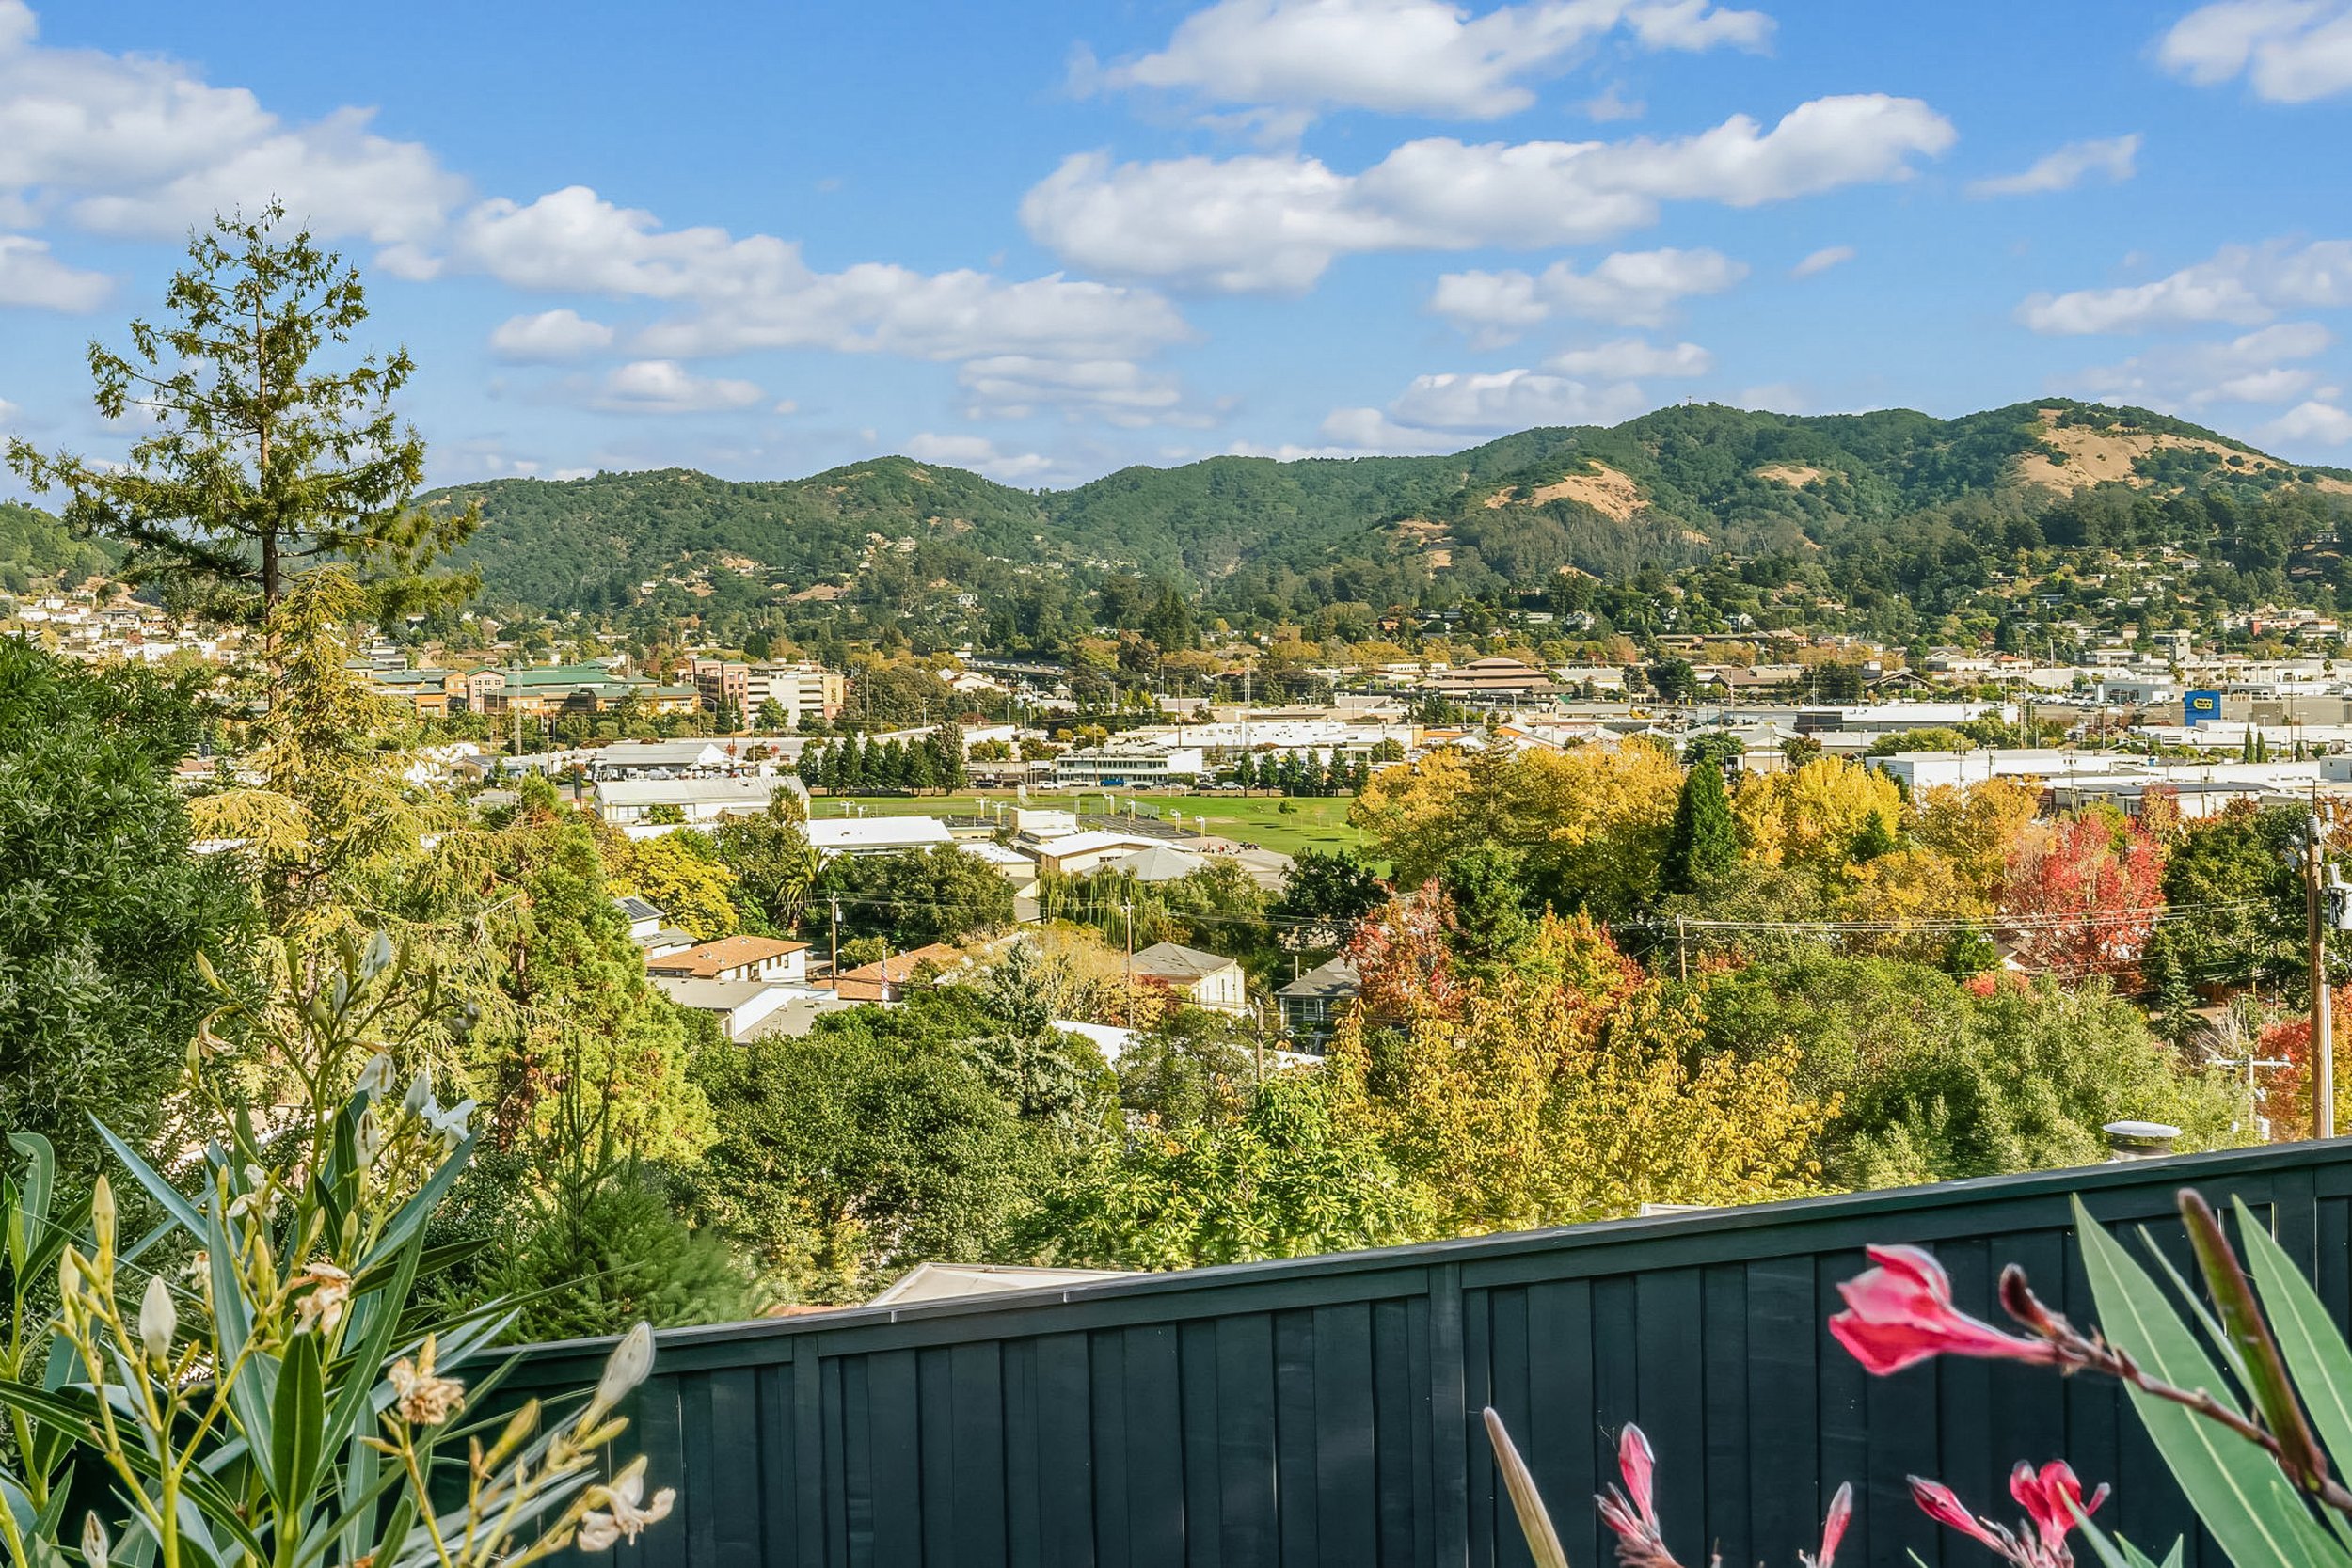 283 Bungalow Avenue San Rafael Real Estate For Sale by Top Realtor Michael Milano at Own Marin Real Estate-10.jpg